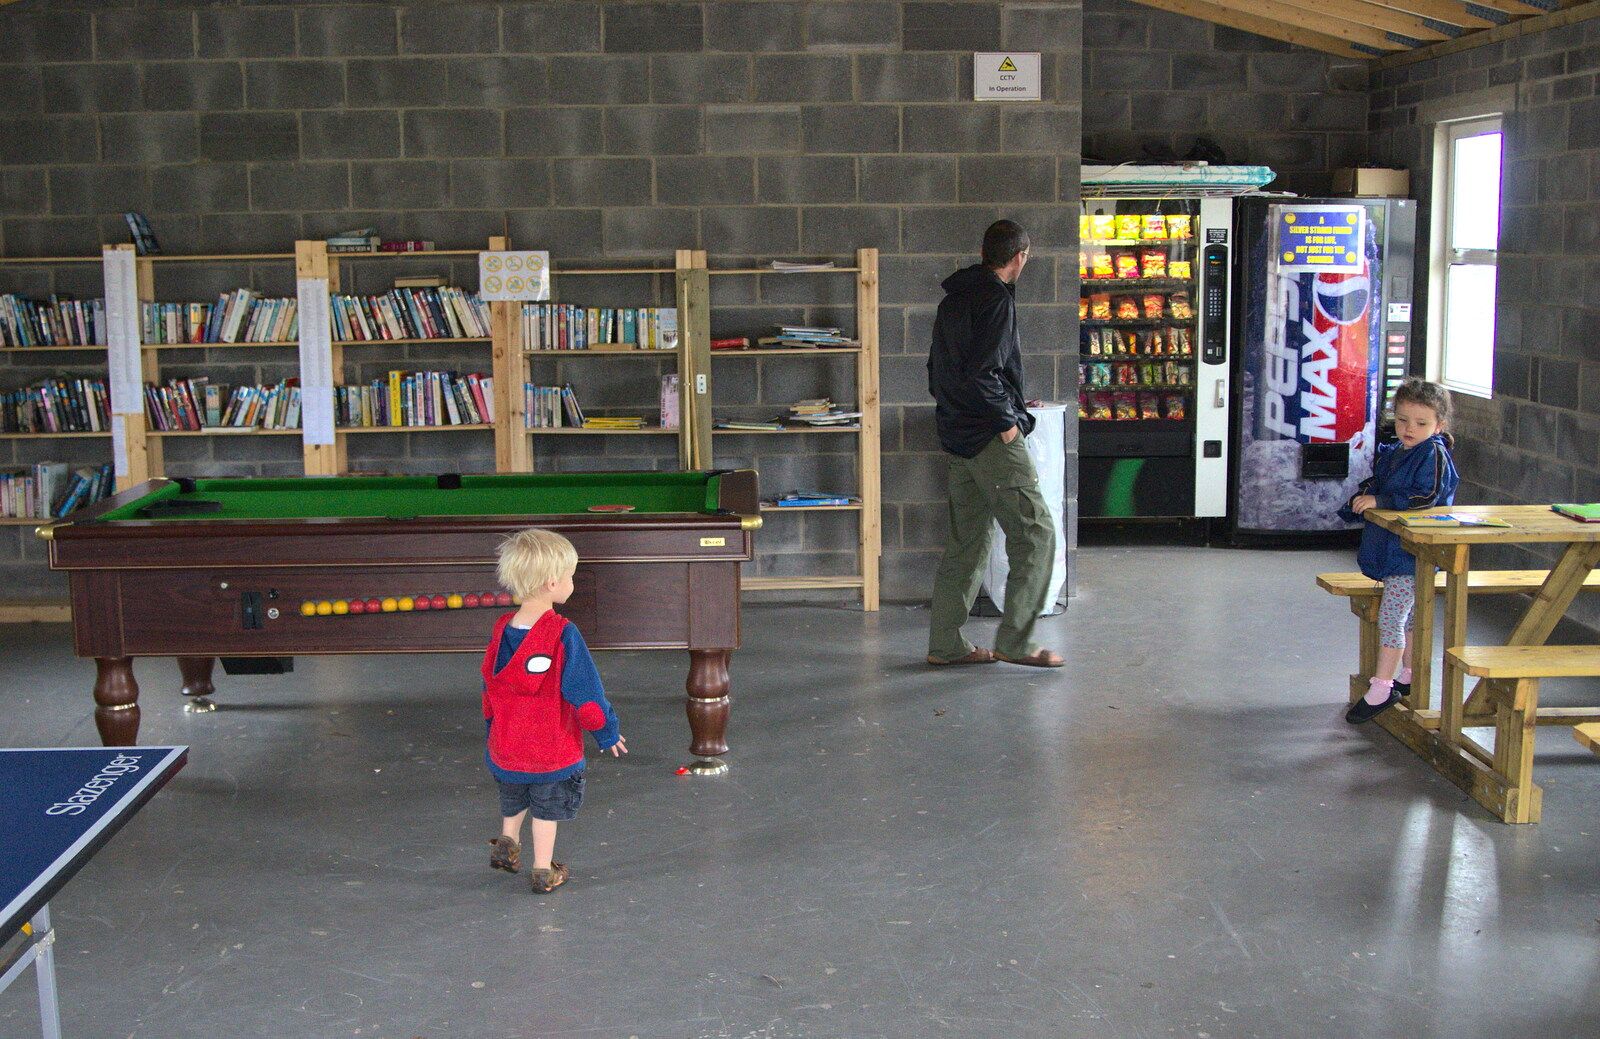 Hiding from the rain in the library/games room from Camping at Silver Strand, Wicklow, County Wicklow, Ireland - 7th August 2014